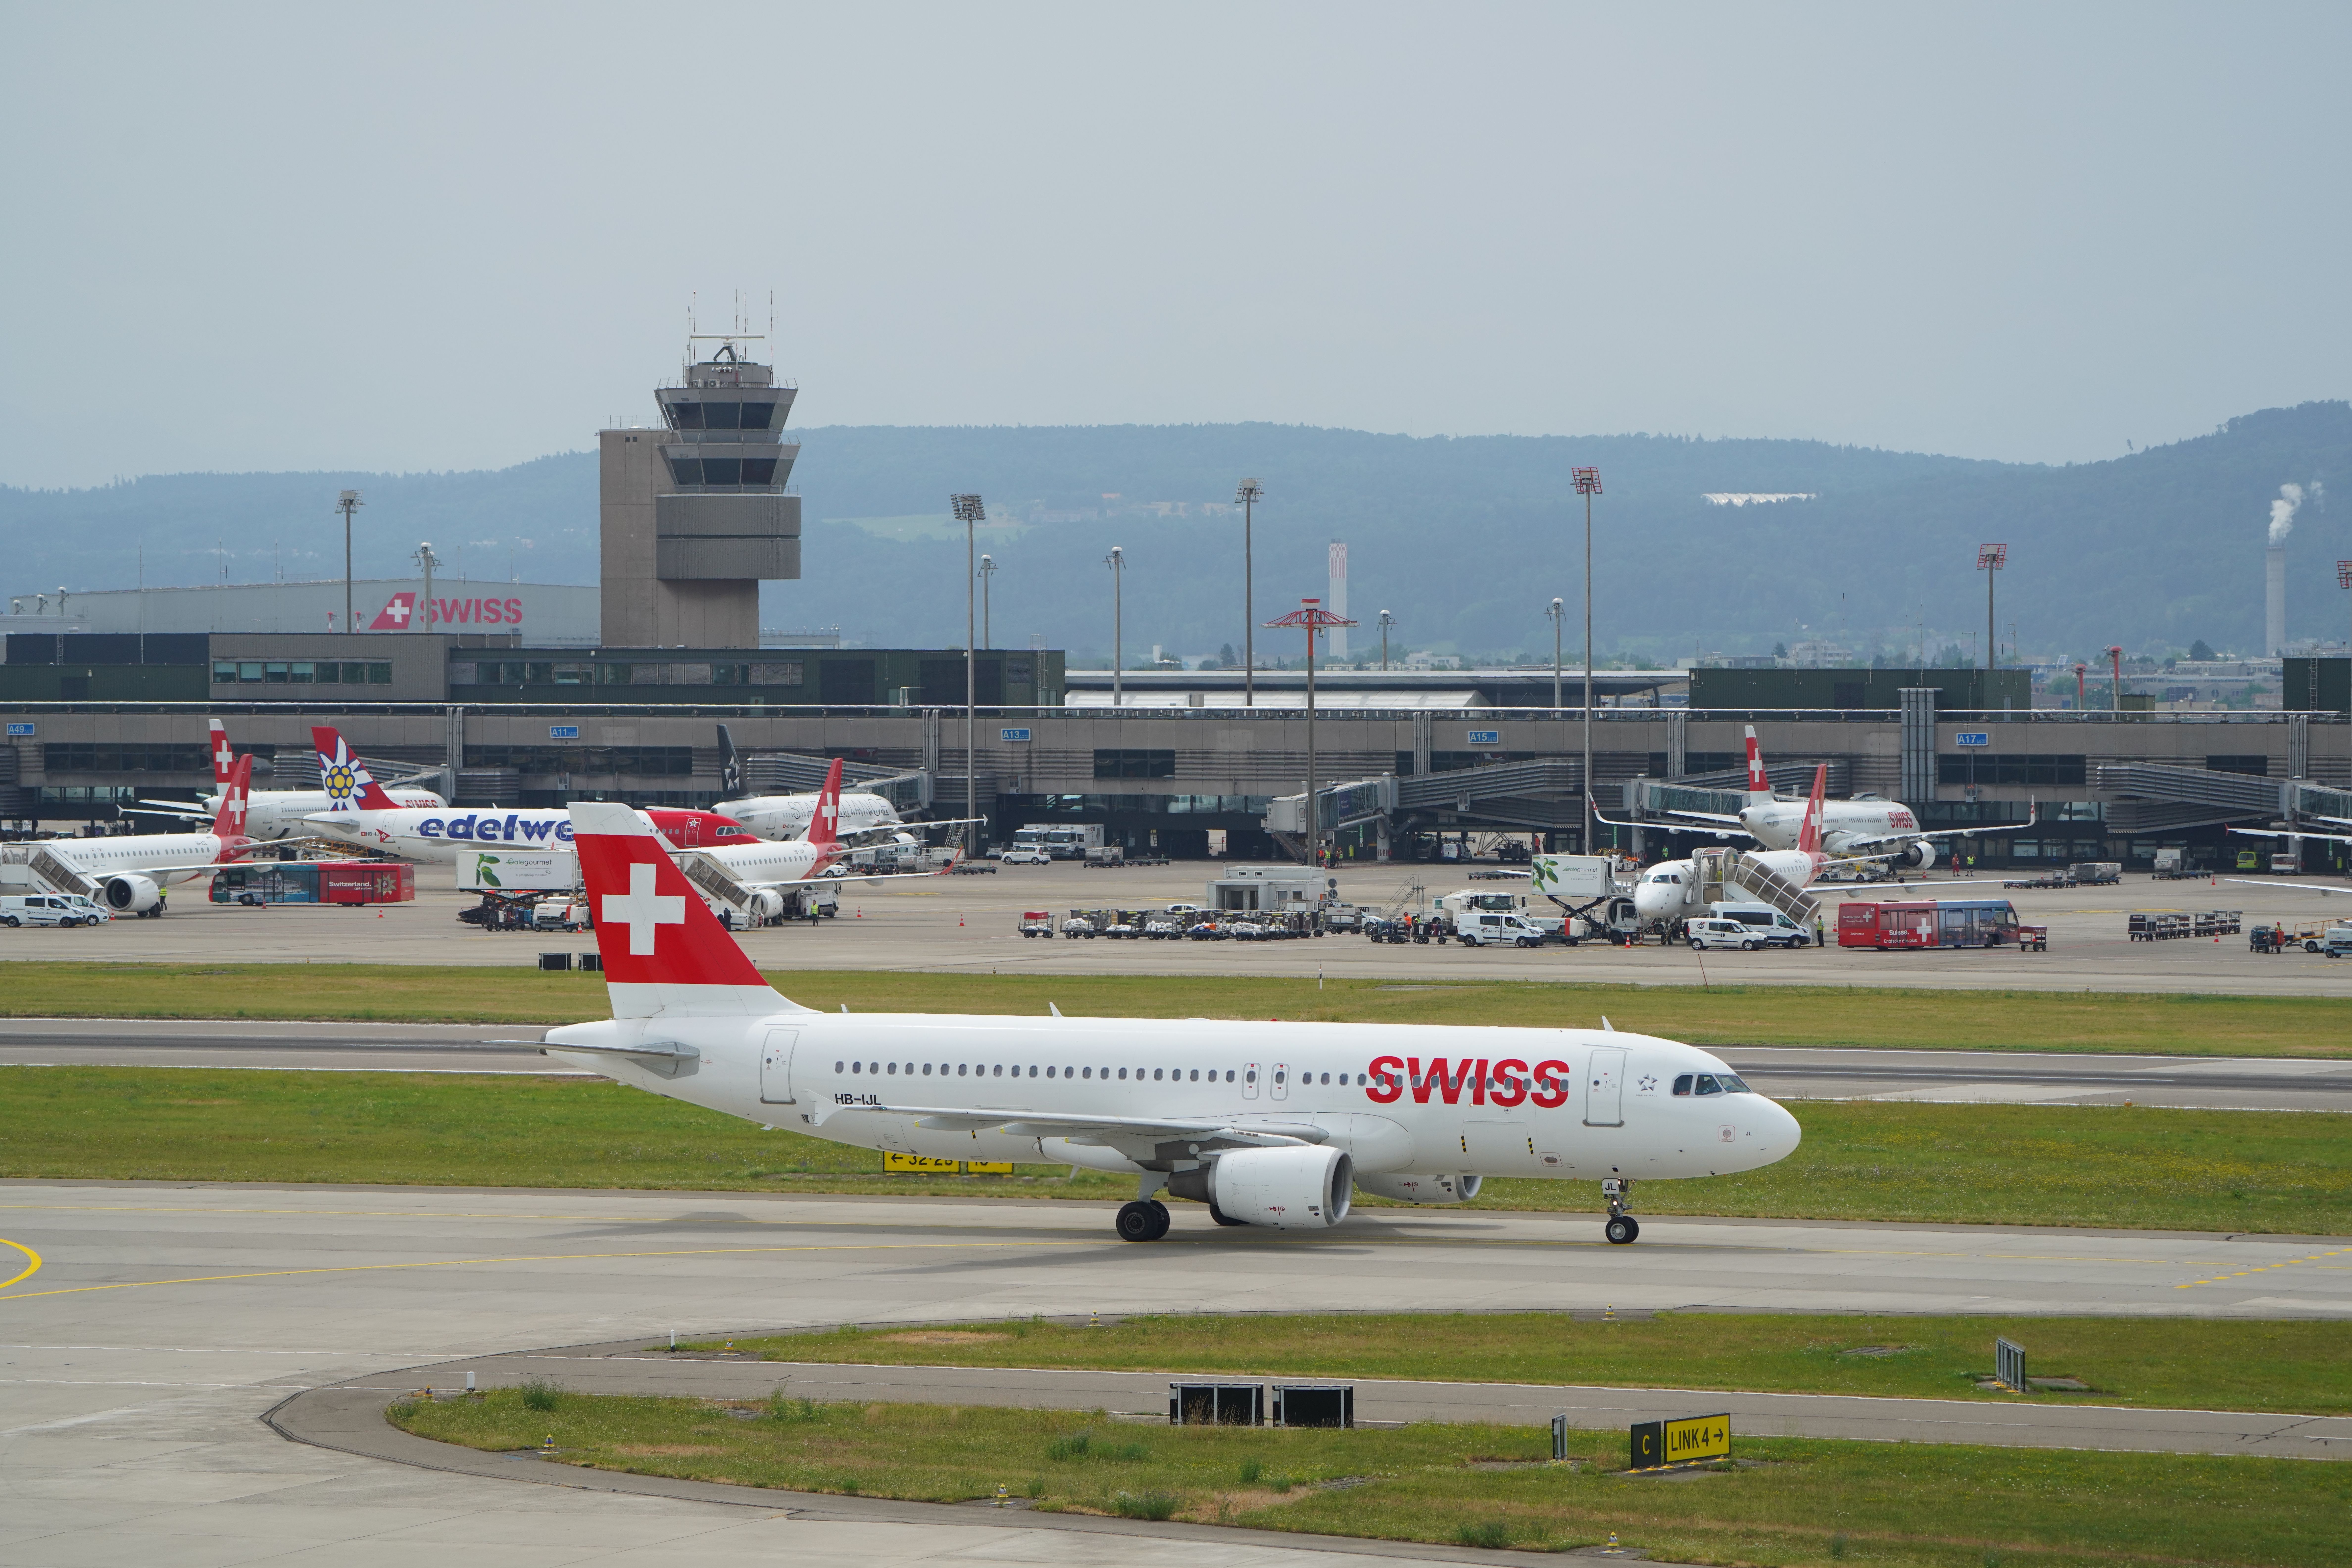 A SWISS aircraft on a taxiway, with many SWISS aircraft in the background.